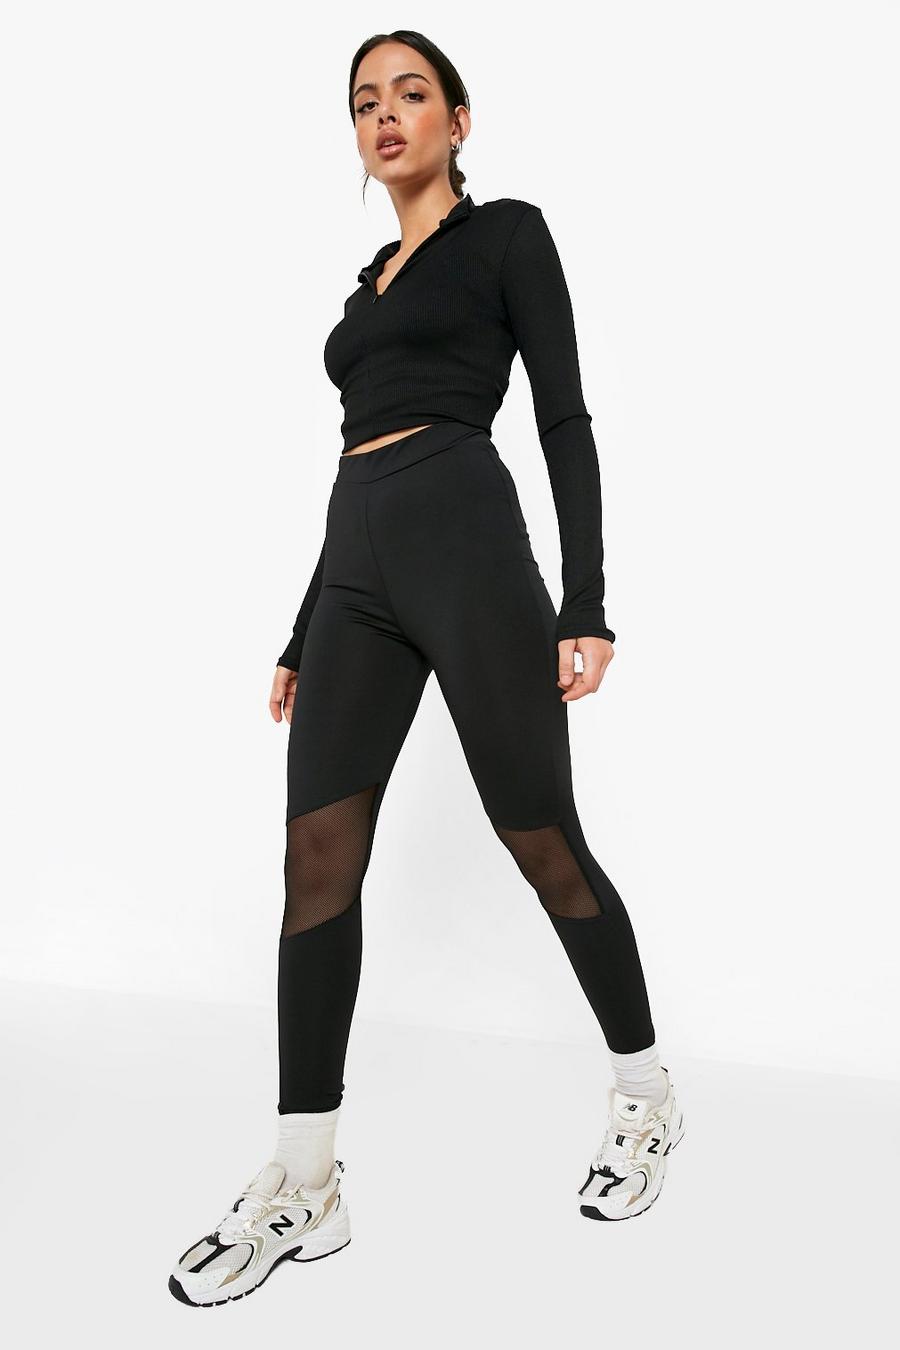 Black Mesh Panel Ruched Booty Boost Legging